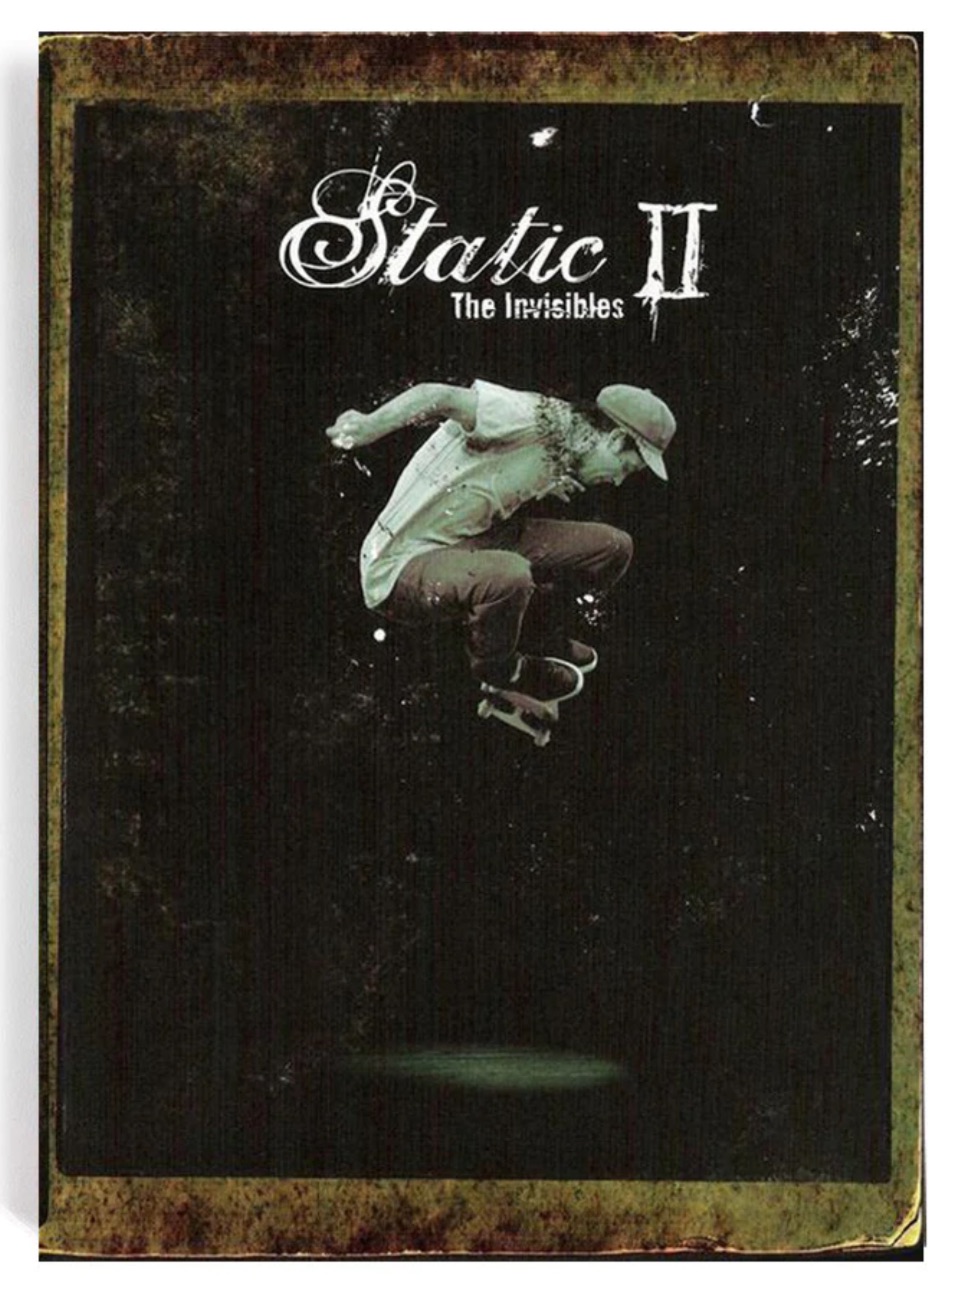 Static II: The Invisibles cover art